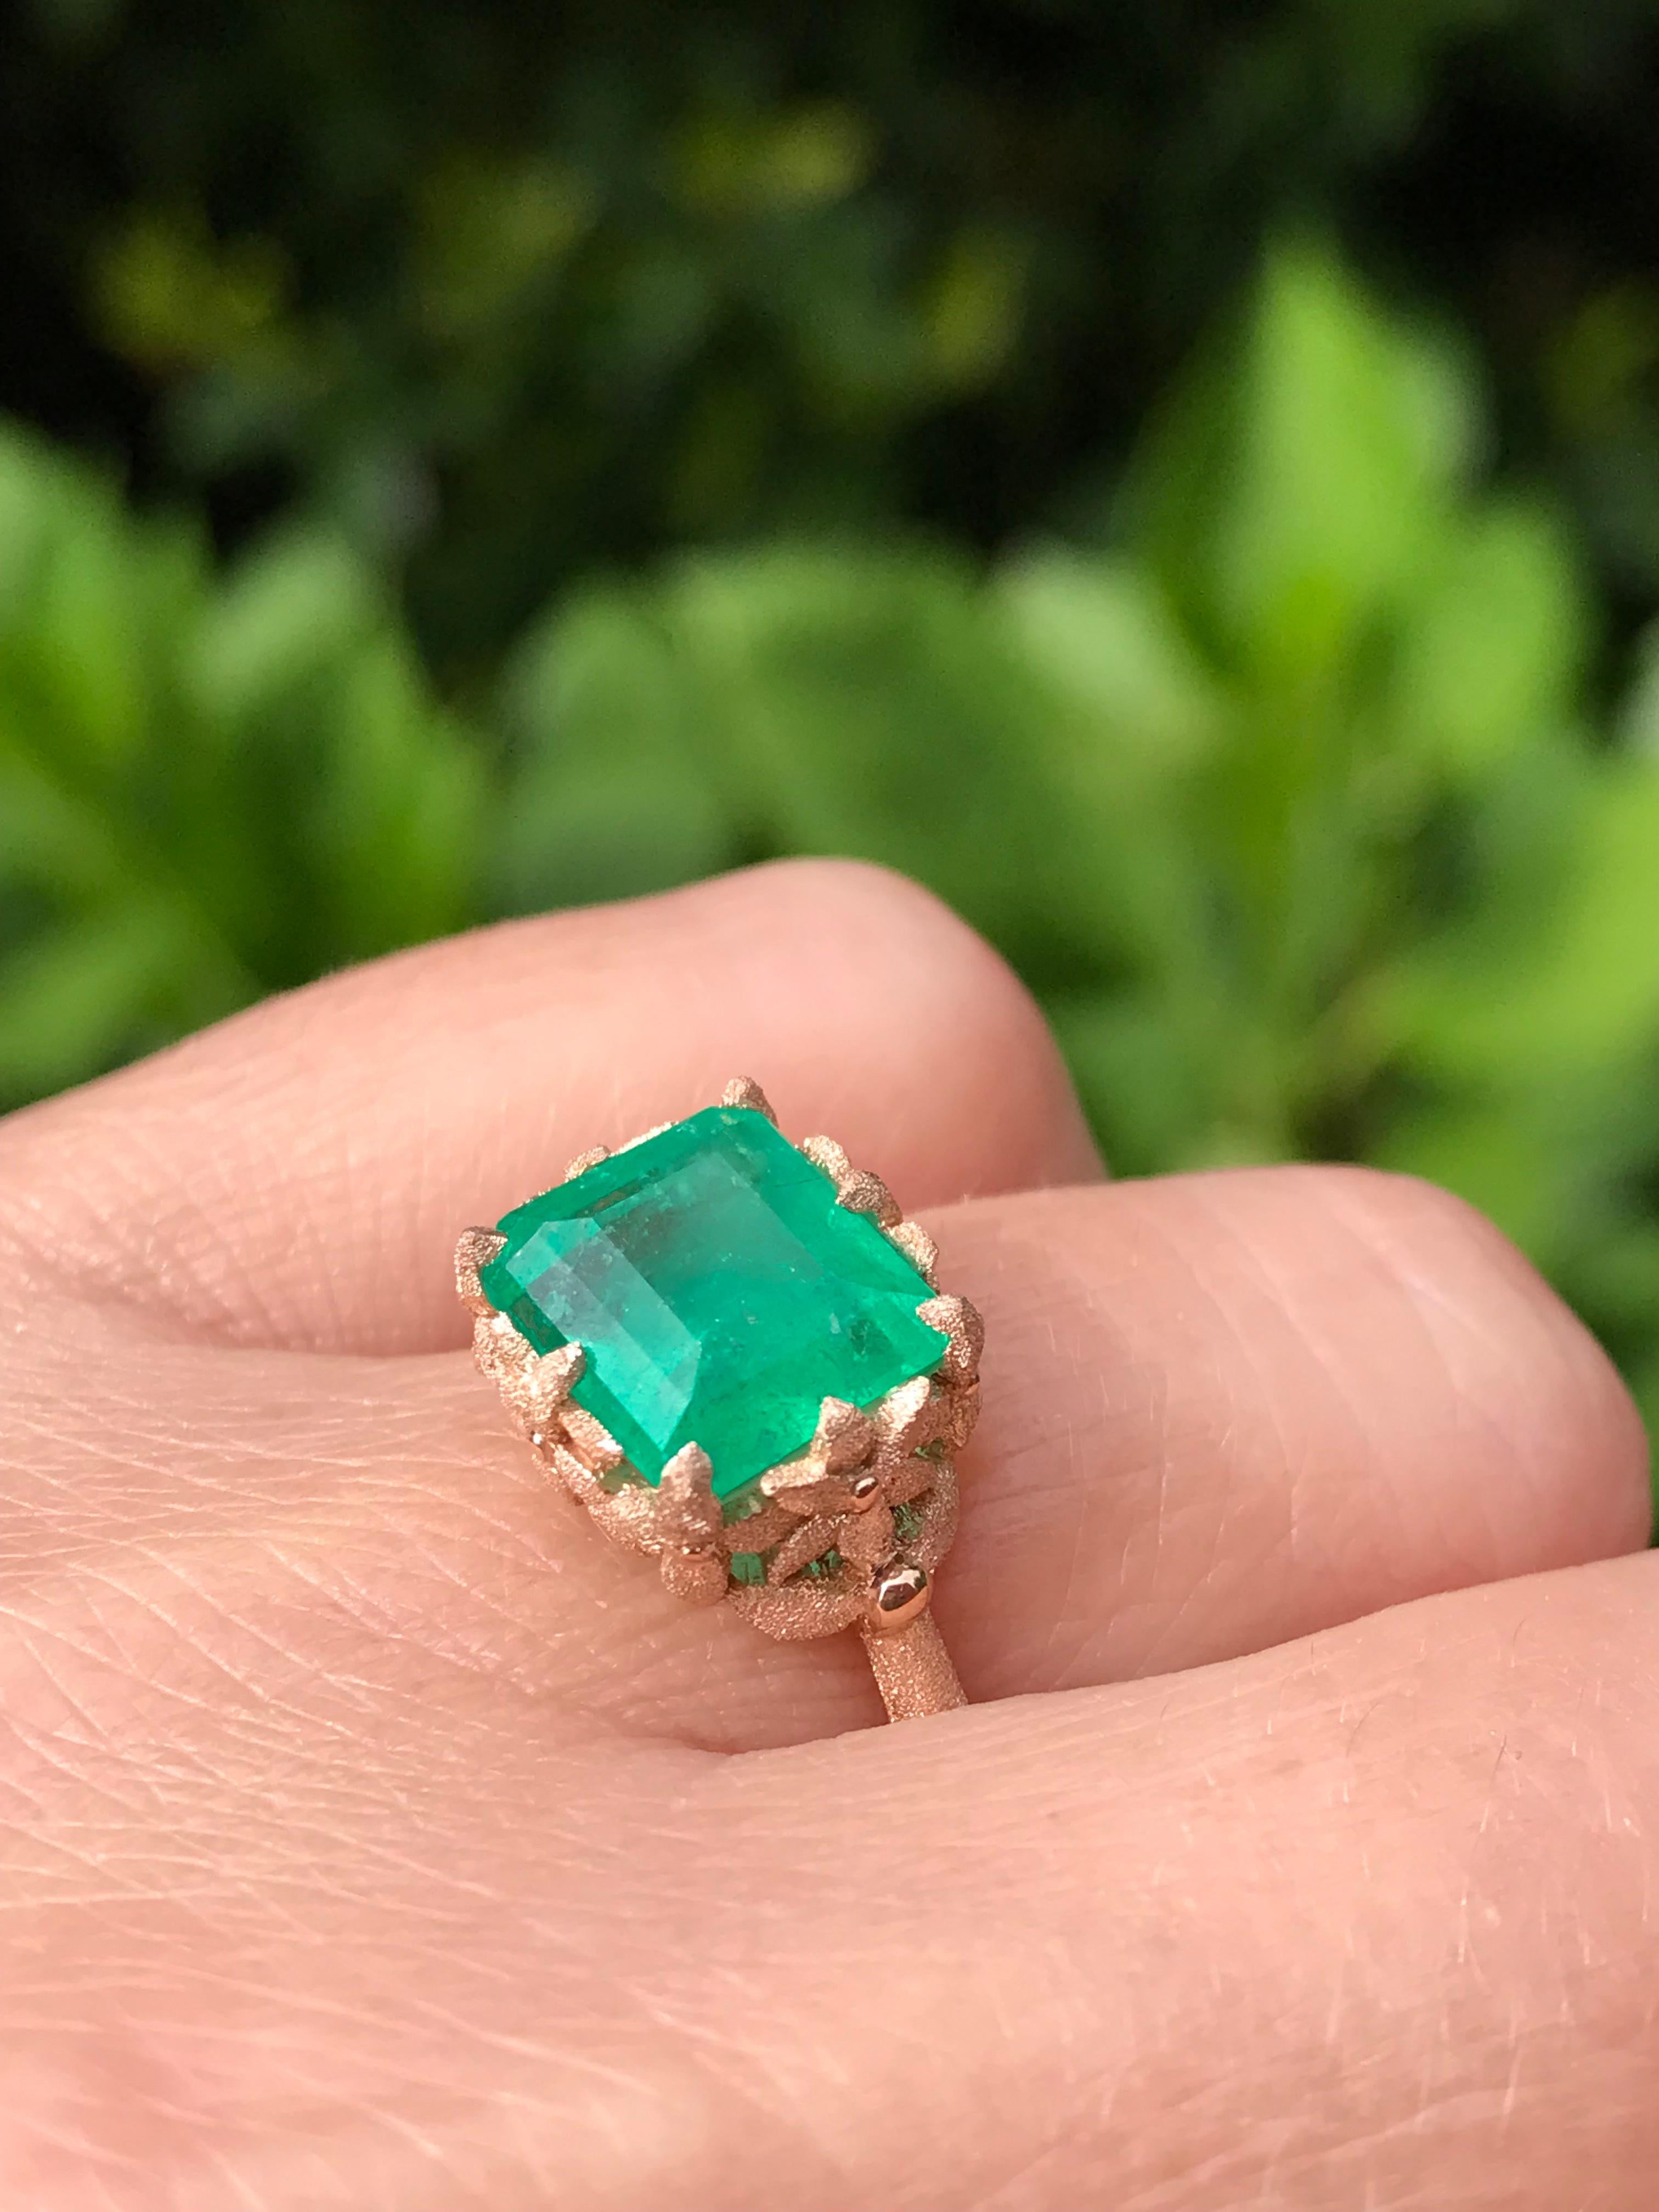 Dalben design 18 kt hand engraved rose gold leaf motif Cocktail Ring with a 3,57 carat emerald cut  emerald. 
Ring size6 1/4 USA , 52 + EU  re-sizable to most finger sizes. 
Bezel stone dimensions :
width 12,1 mm
height 10,7 mm
The ring has been